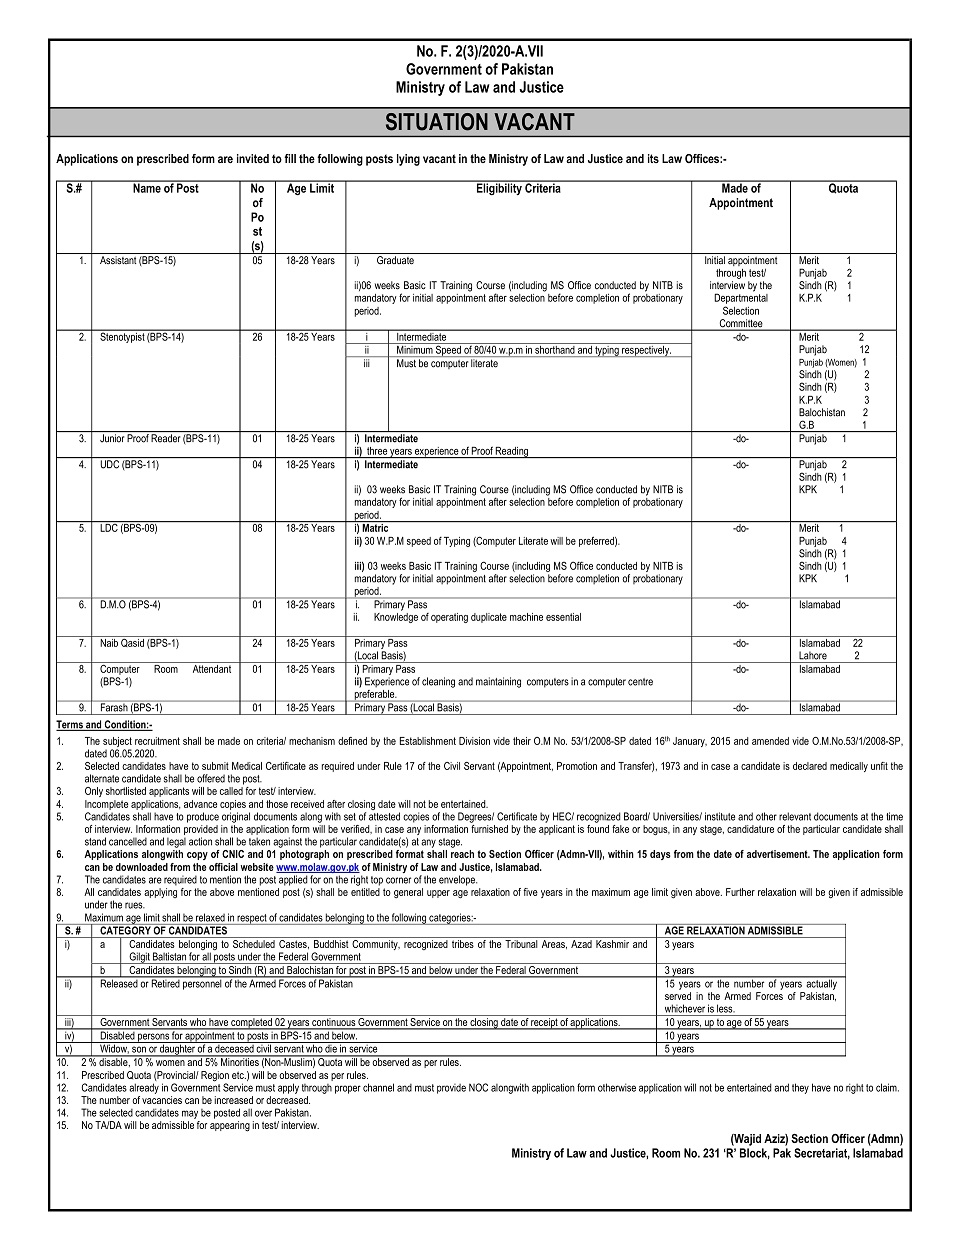 Ministry of law and justice jobs adertisement